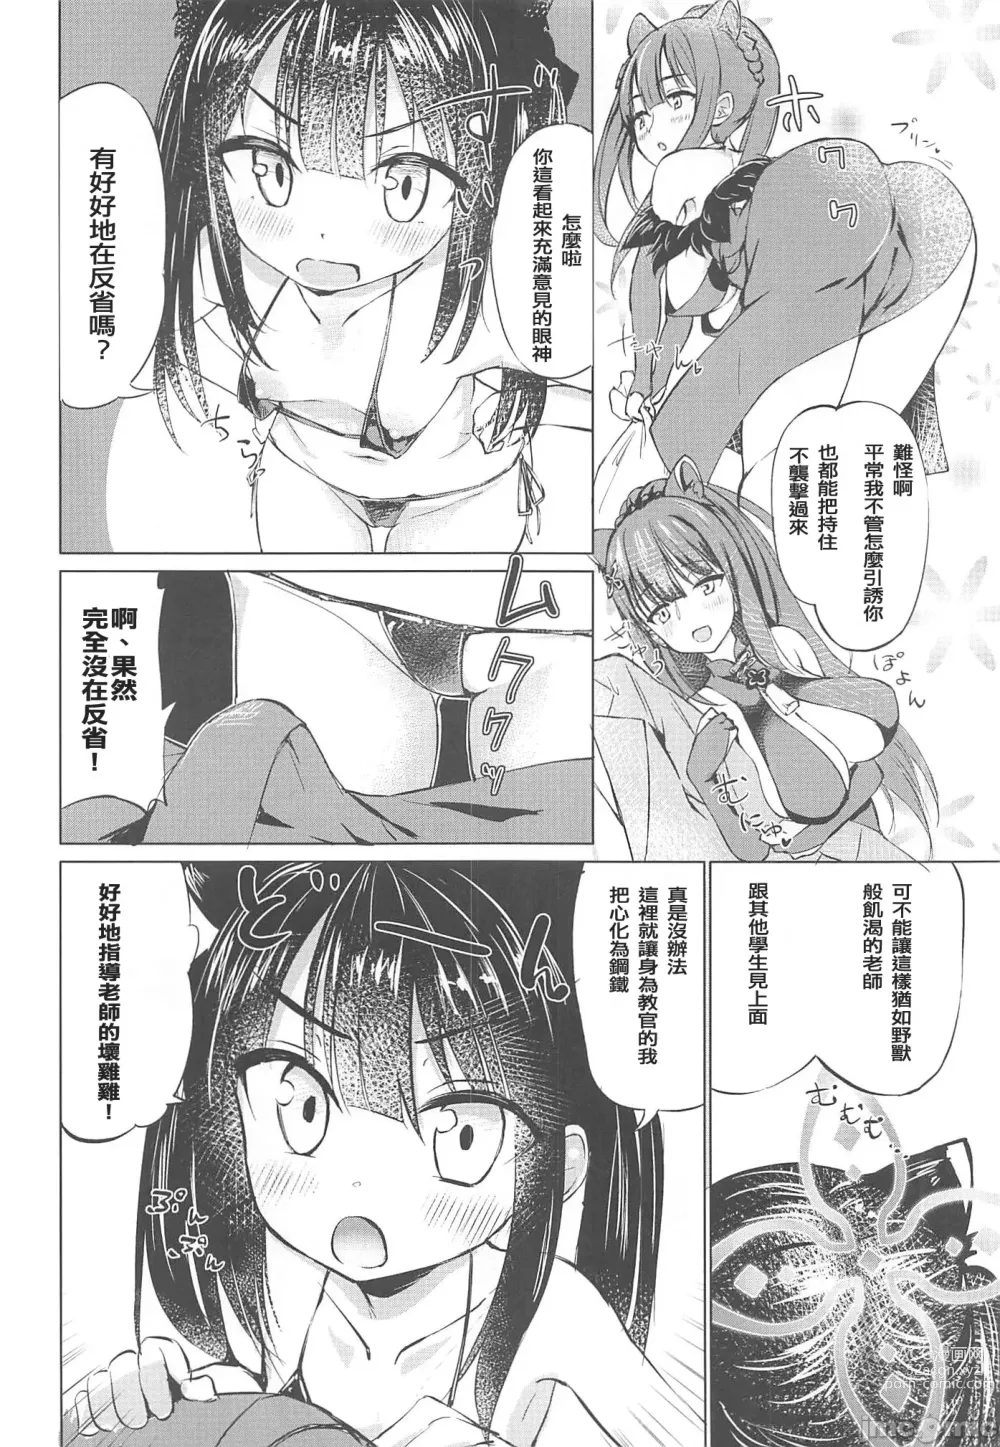 Page 5 of doujinshi Youjo Archive